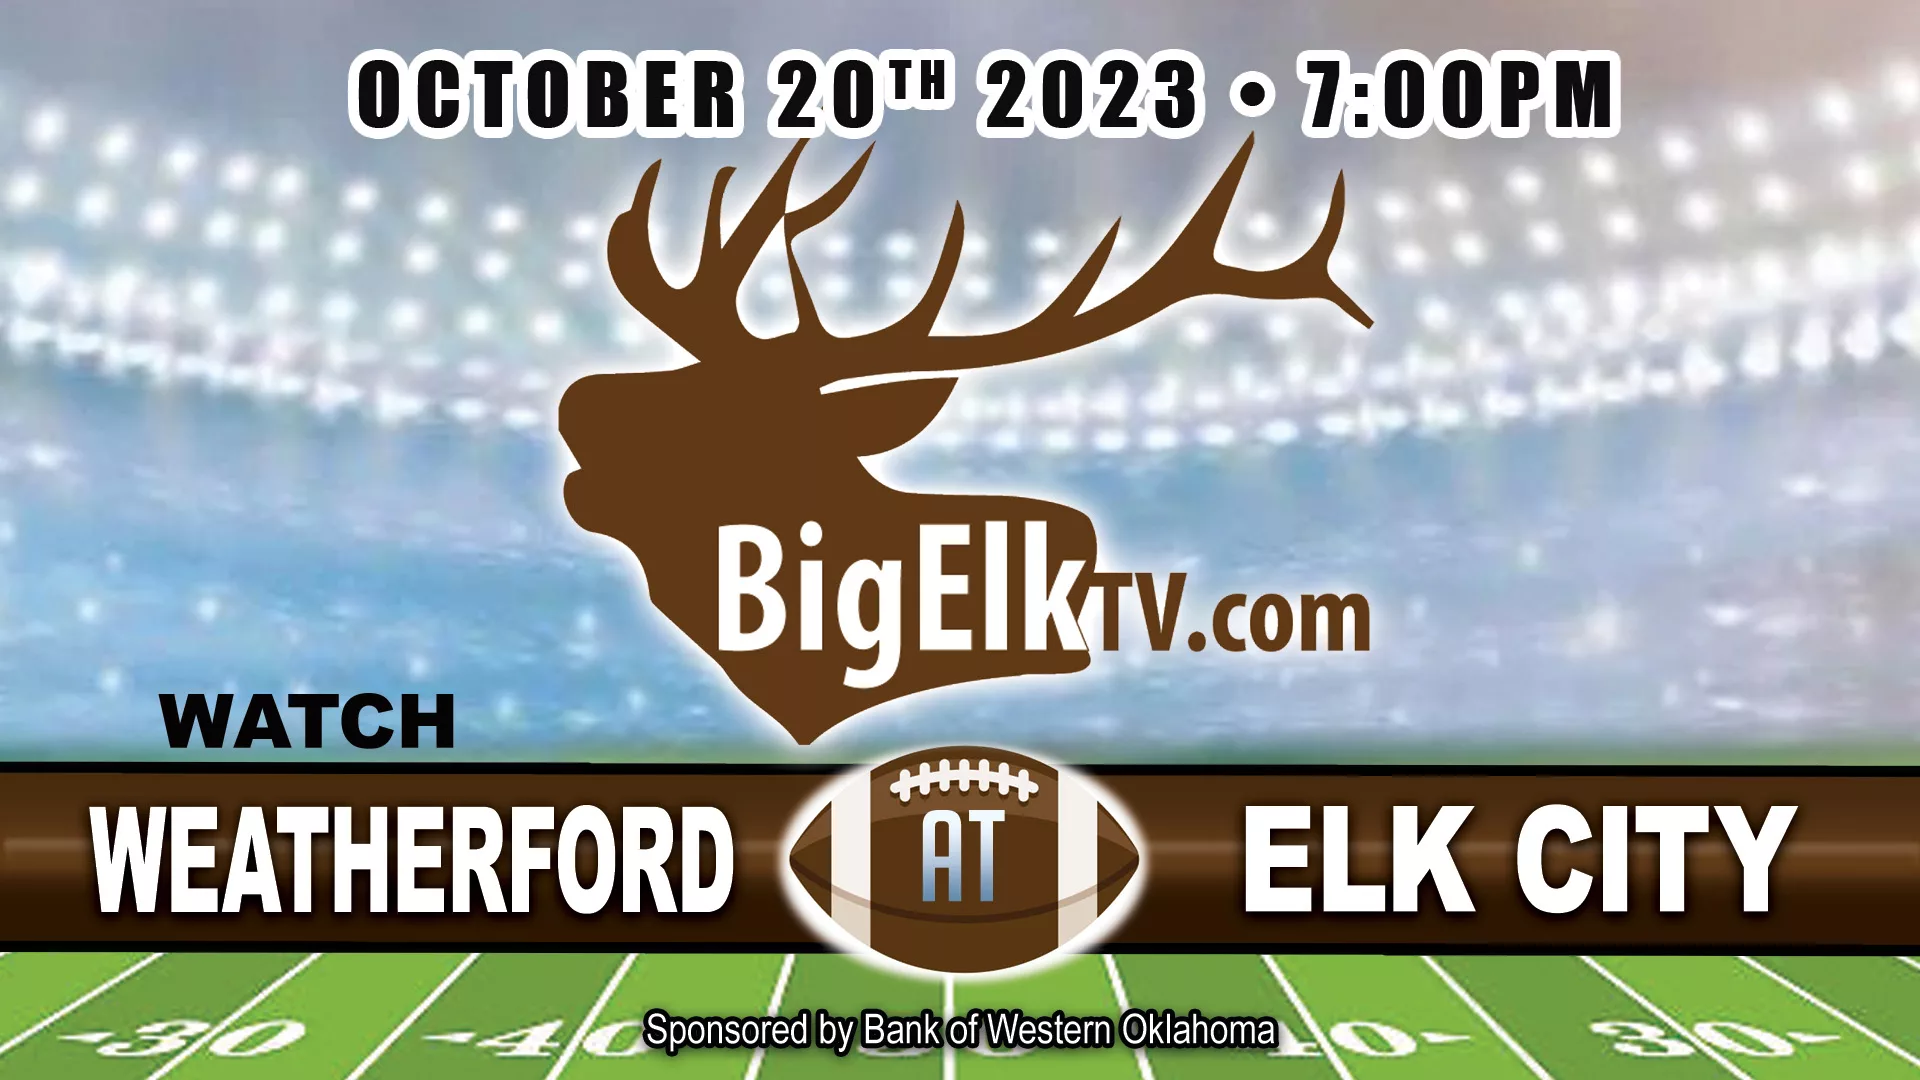 Weatherford vs. Elk City Football Game - October 20th, 7 PM